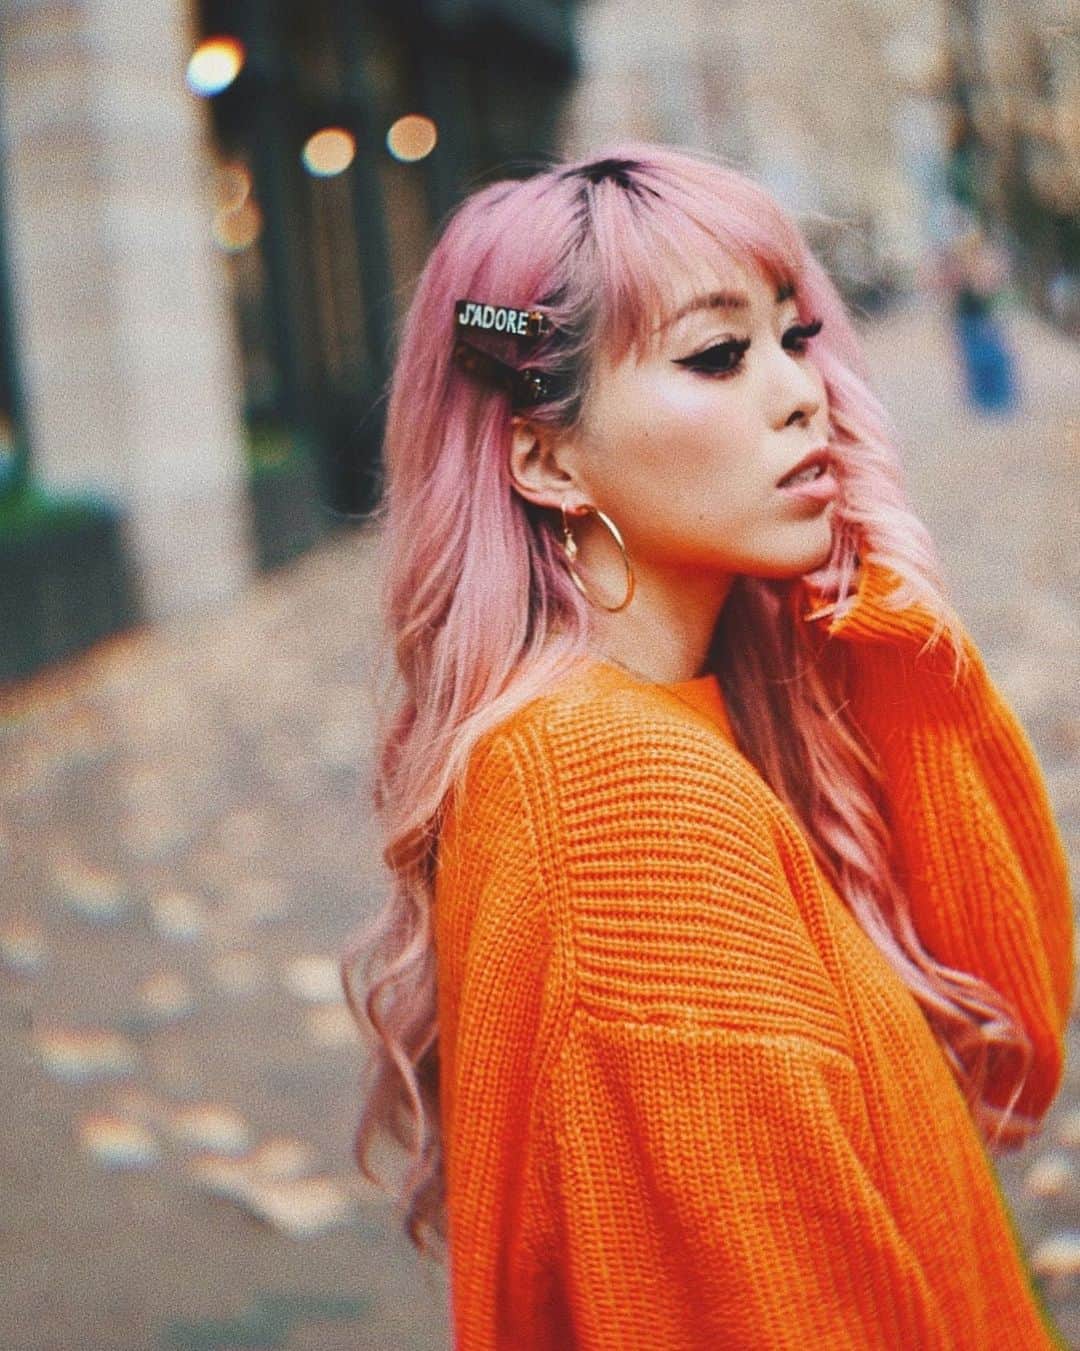 AikA♡ • 愛香 | JP Blogger • ブロガーのインスタグラム：「7 things to remember 🧡﻿ 𝟙. All positivity in, all negativity out ﻿ 𝟚. Opinions do not definite you ﻿ 𝟛. Everyone’s journey is different ﻿ 𝟜. Overthinking leads to sadness ﻿ 𝟝. Happiness is found within YOU, not outside ﻿ 𝟞. Positive attitudes create positive outcomes ﻿ 𝟟. Be thankful, appreciate often ﻿ ﻿ What else should be on this list??✨ ﻿ ﻿ ⋆ ⋆ ⋆ ⋆ ﻿ ﻿ 人として忘れちゃいけないこと🧡﻿ 𝟙. 自分が悪いと思ったら素直に謝る﻿ 𝟚. 感謝の気持ちを一日も忘れちゃいけない﻿ 𝟛. 「ありがとう」と言葉に出す﻿ 𝟜. 人間は皆平等、偏見を捨てよぅ﻿ 𝟝. 思いやりを持って人と接する﻿ 𝟞. 苦しい時、誰かに頼ってもいい﻿ 𝟟. 自分を沢山愛してあげる﻿ ﻿ 他にもあったら教えてね✨﻿」